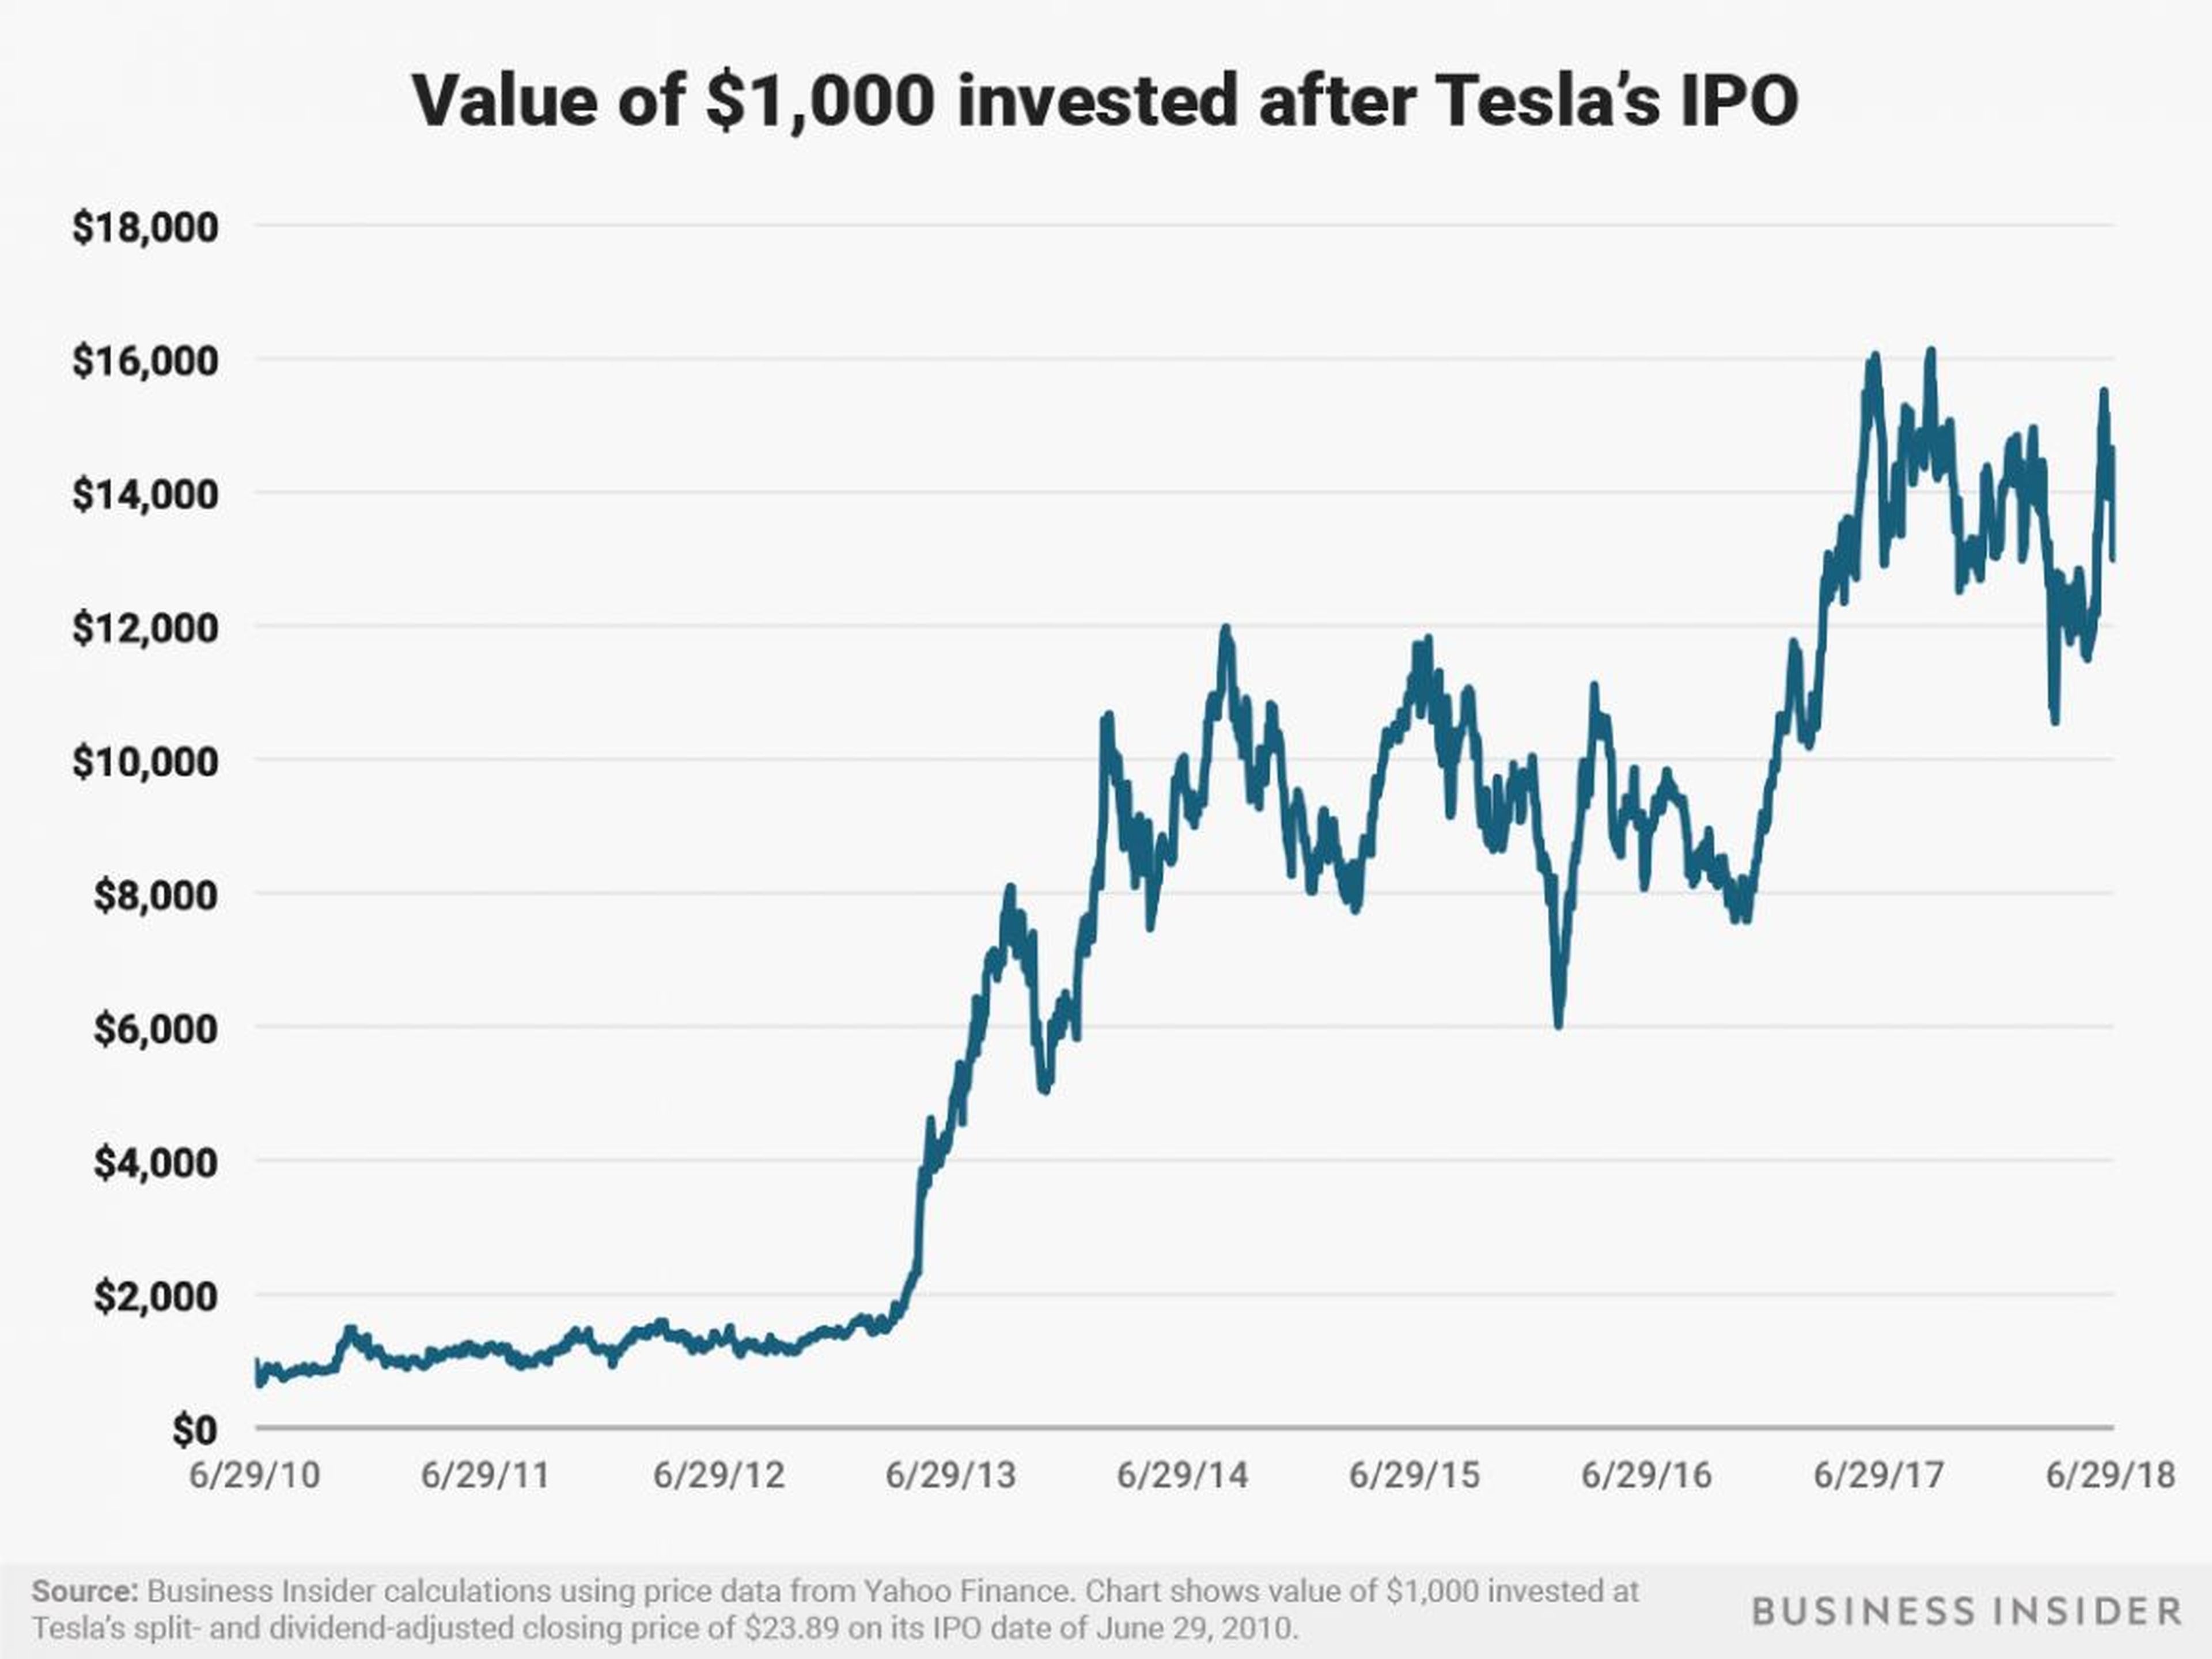 A $1,000 investment in Tesla after its June 29, 2010 IPO would be worth around $13,000 today.